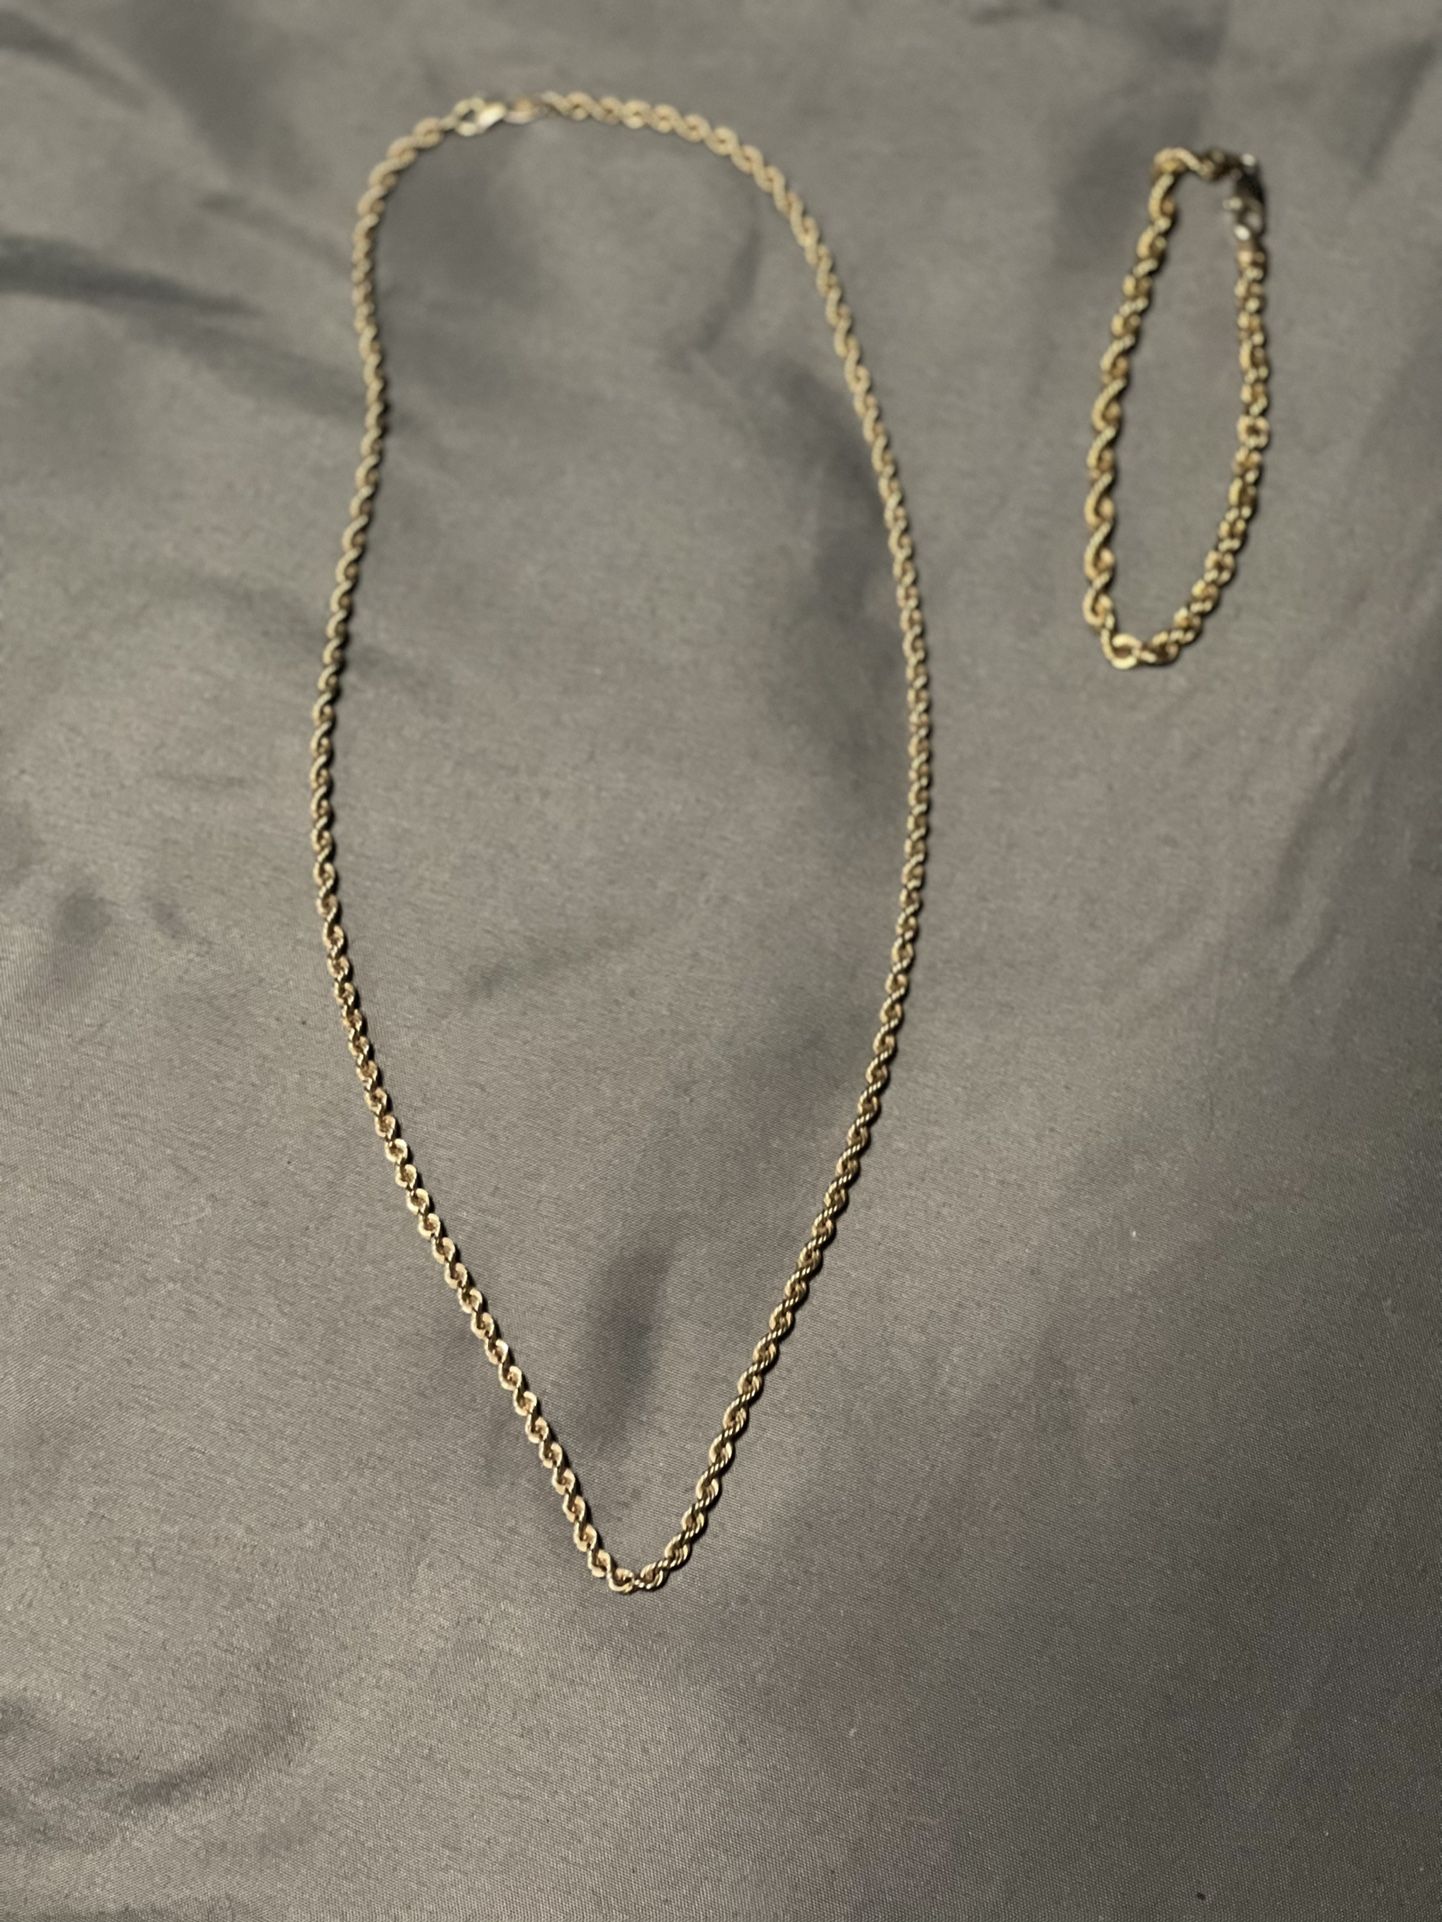 10k Gold Rope Necklace And Bracelet For Sale$350 For Both 